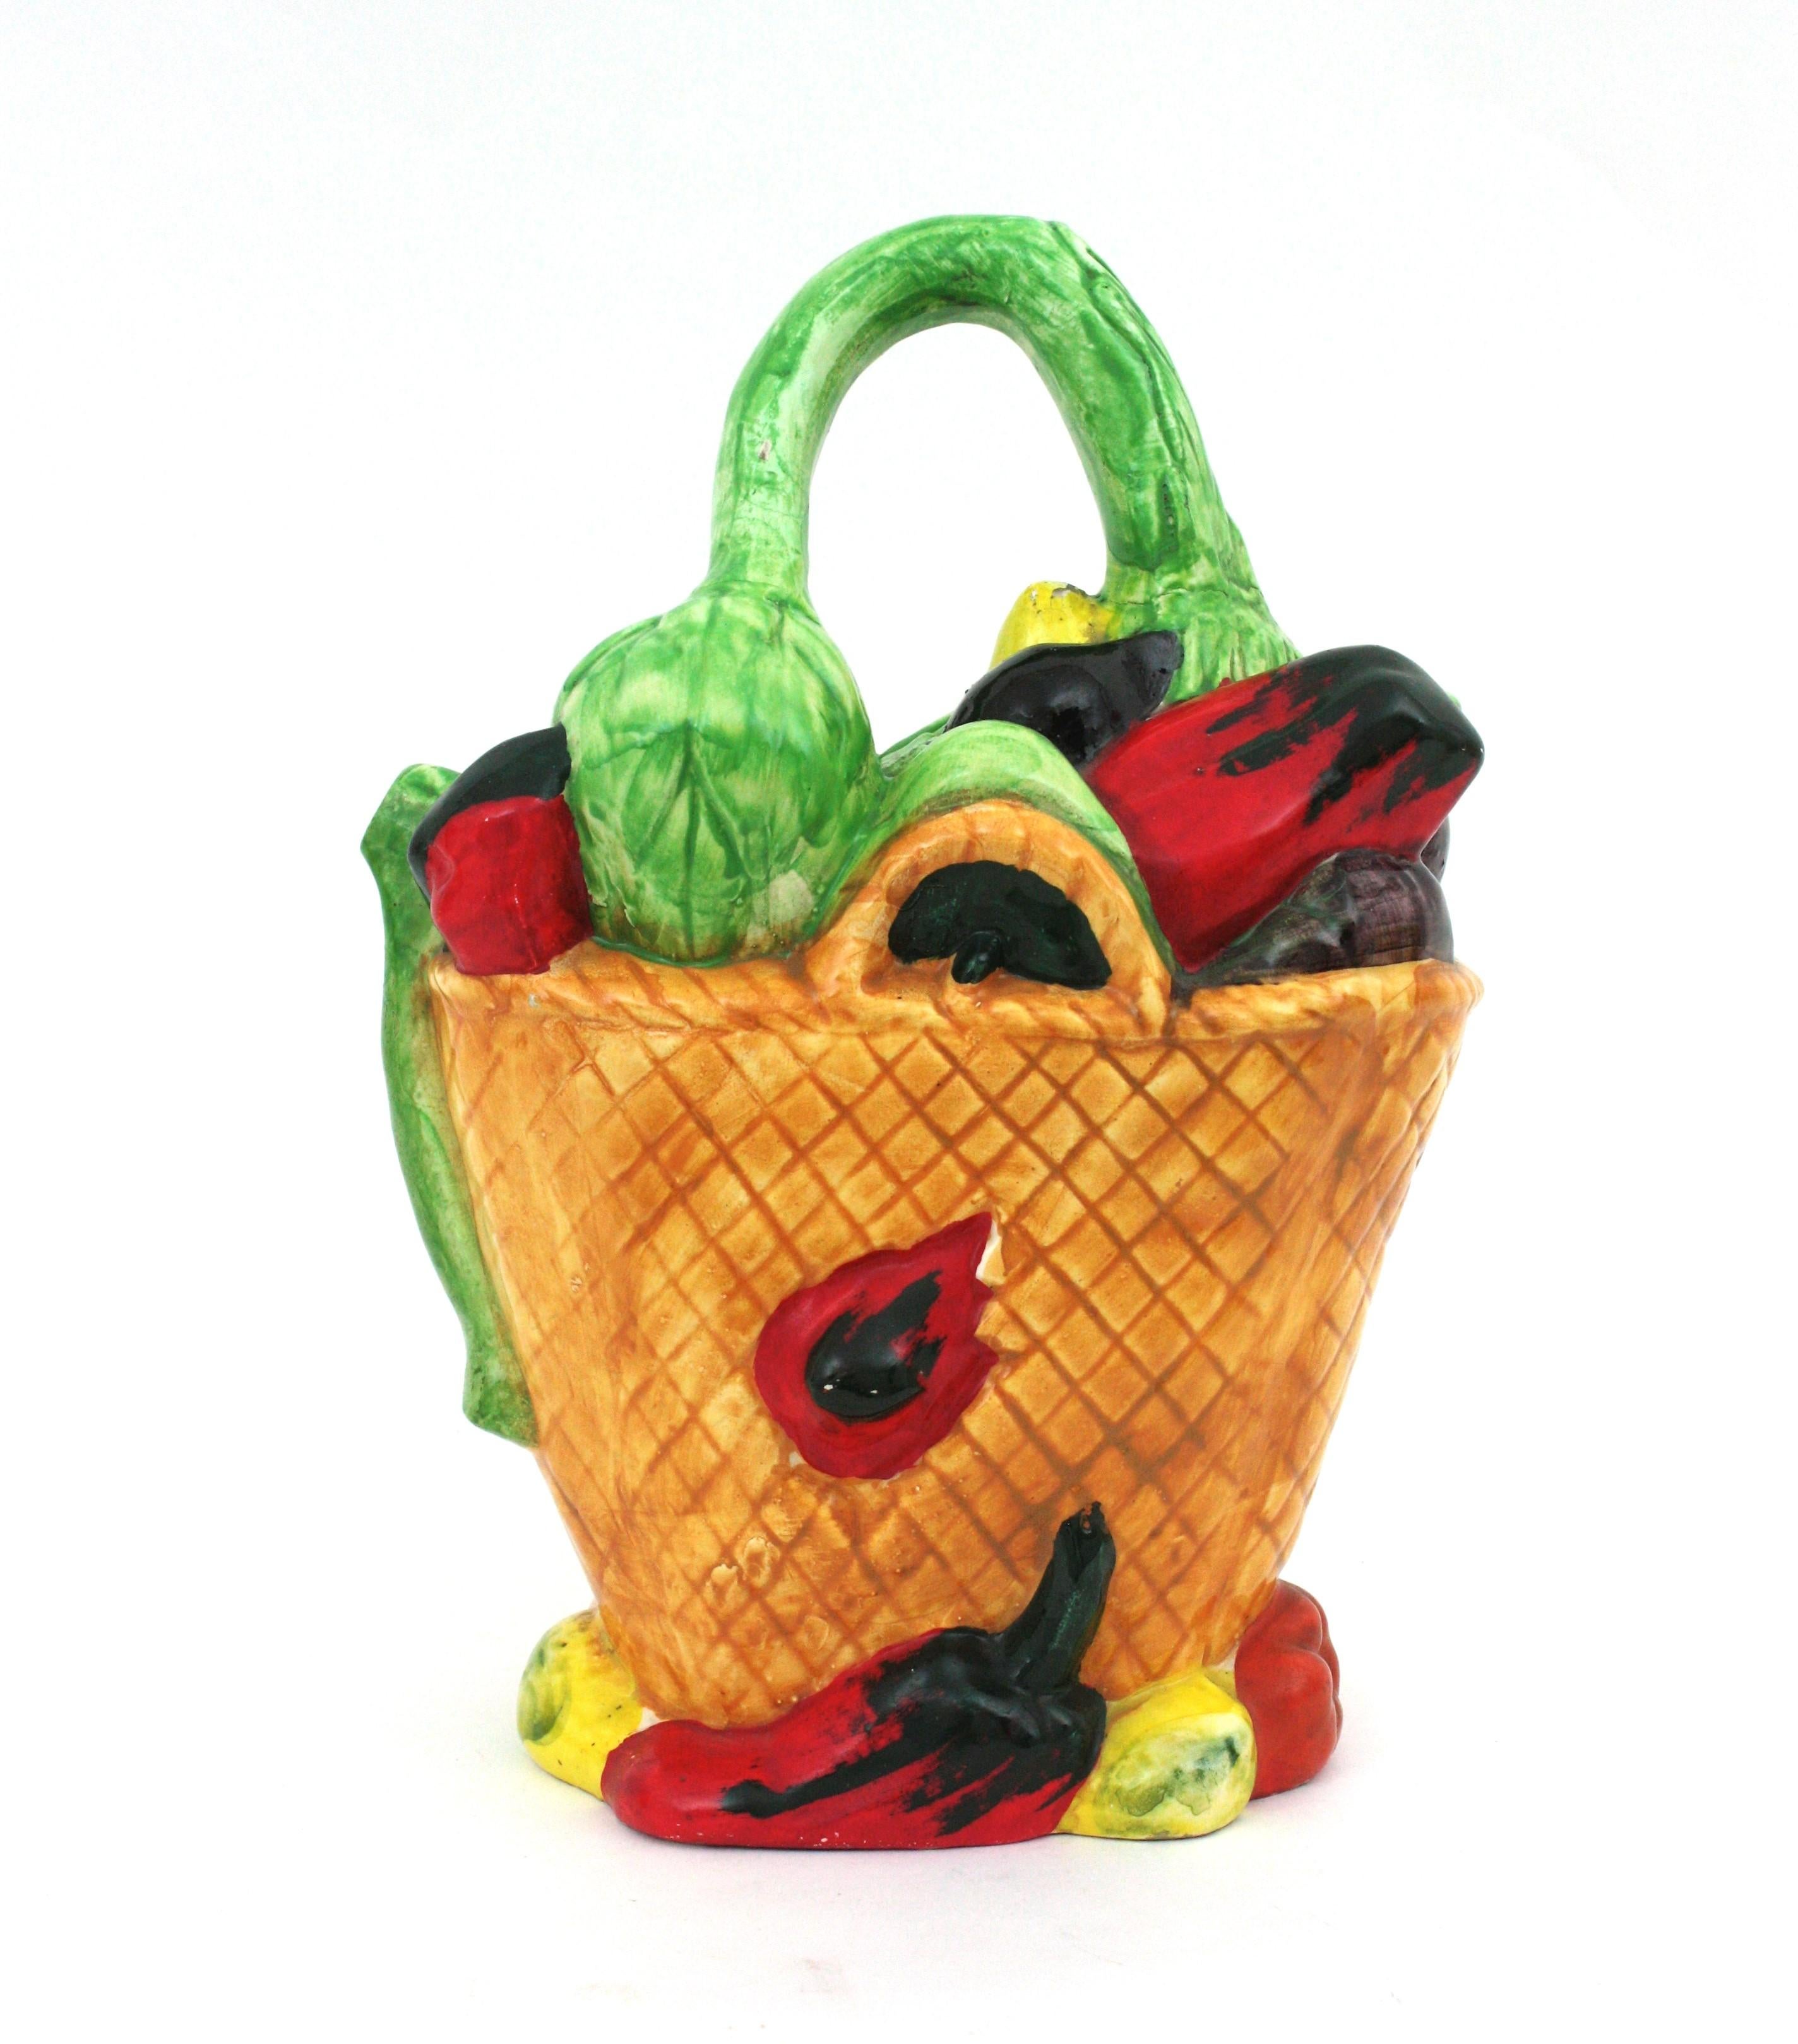 Eye-catching realistic Majolica vegetables jug / pitcher in multicolor glazed ceramic,  Spain, 1950s-1960s.
Hand-painted Manises ceramic decorative jug in the shape of a basket of vegetables
A cool accent to any kitchen or to be used as serving